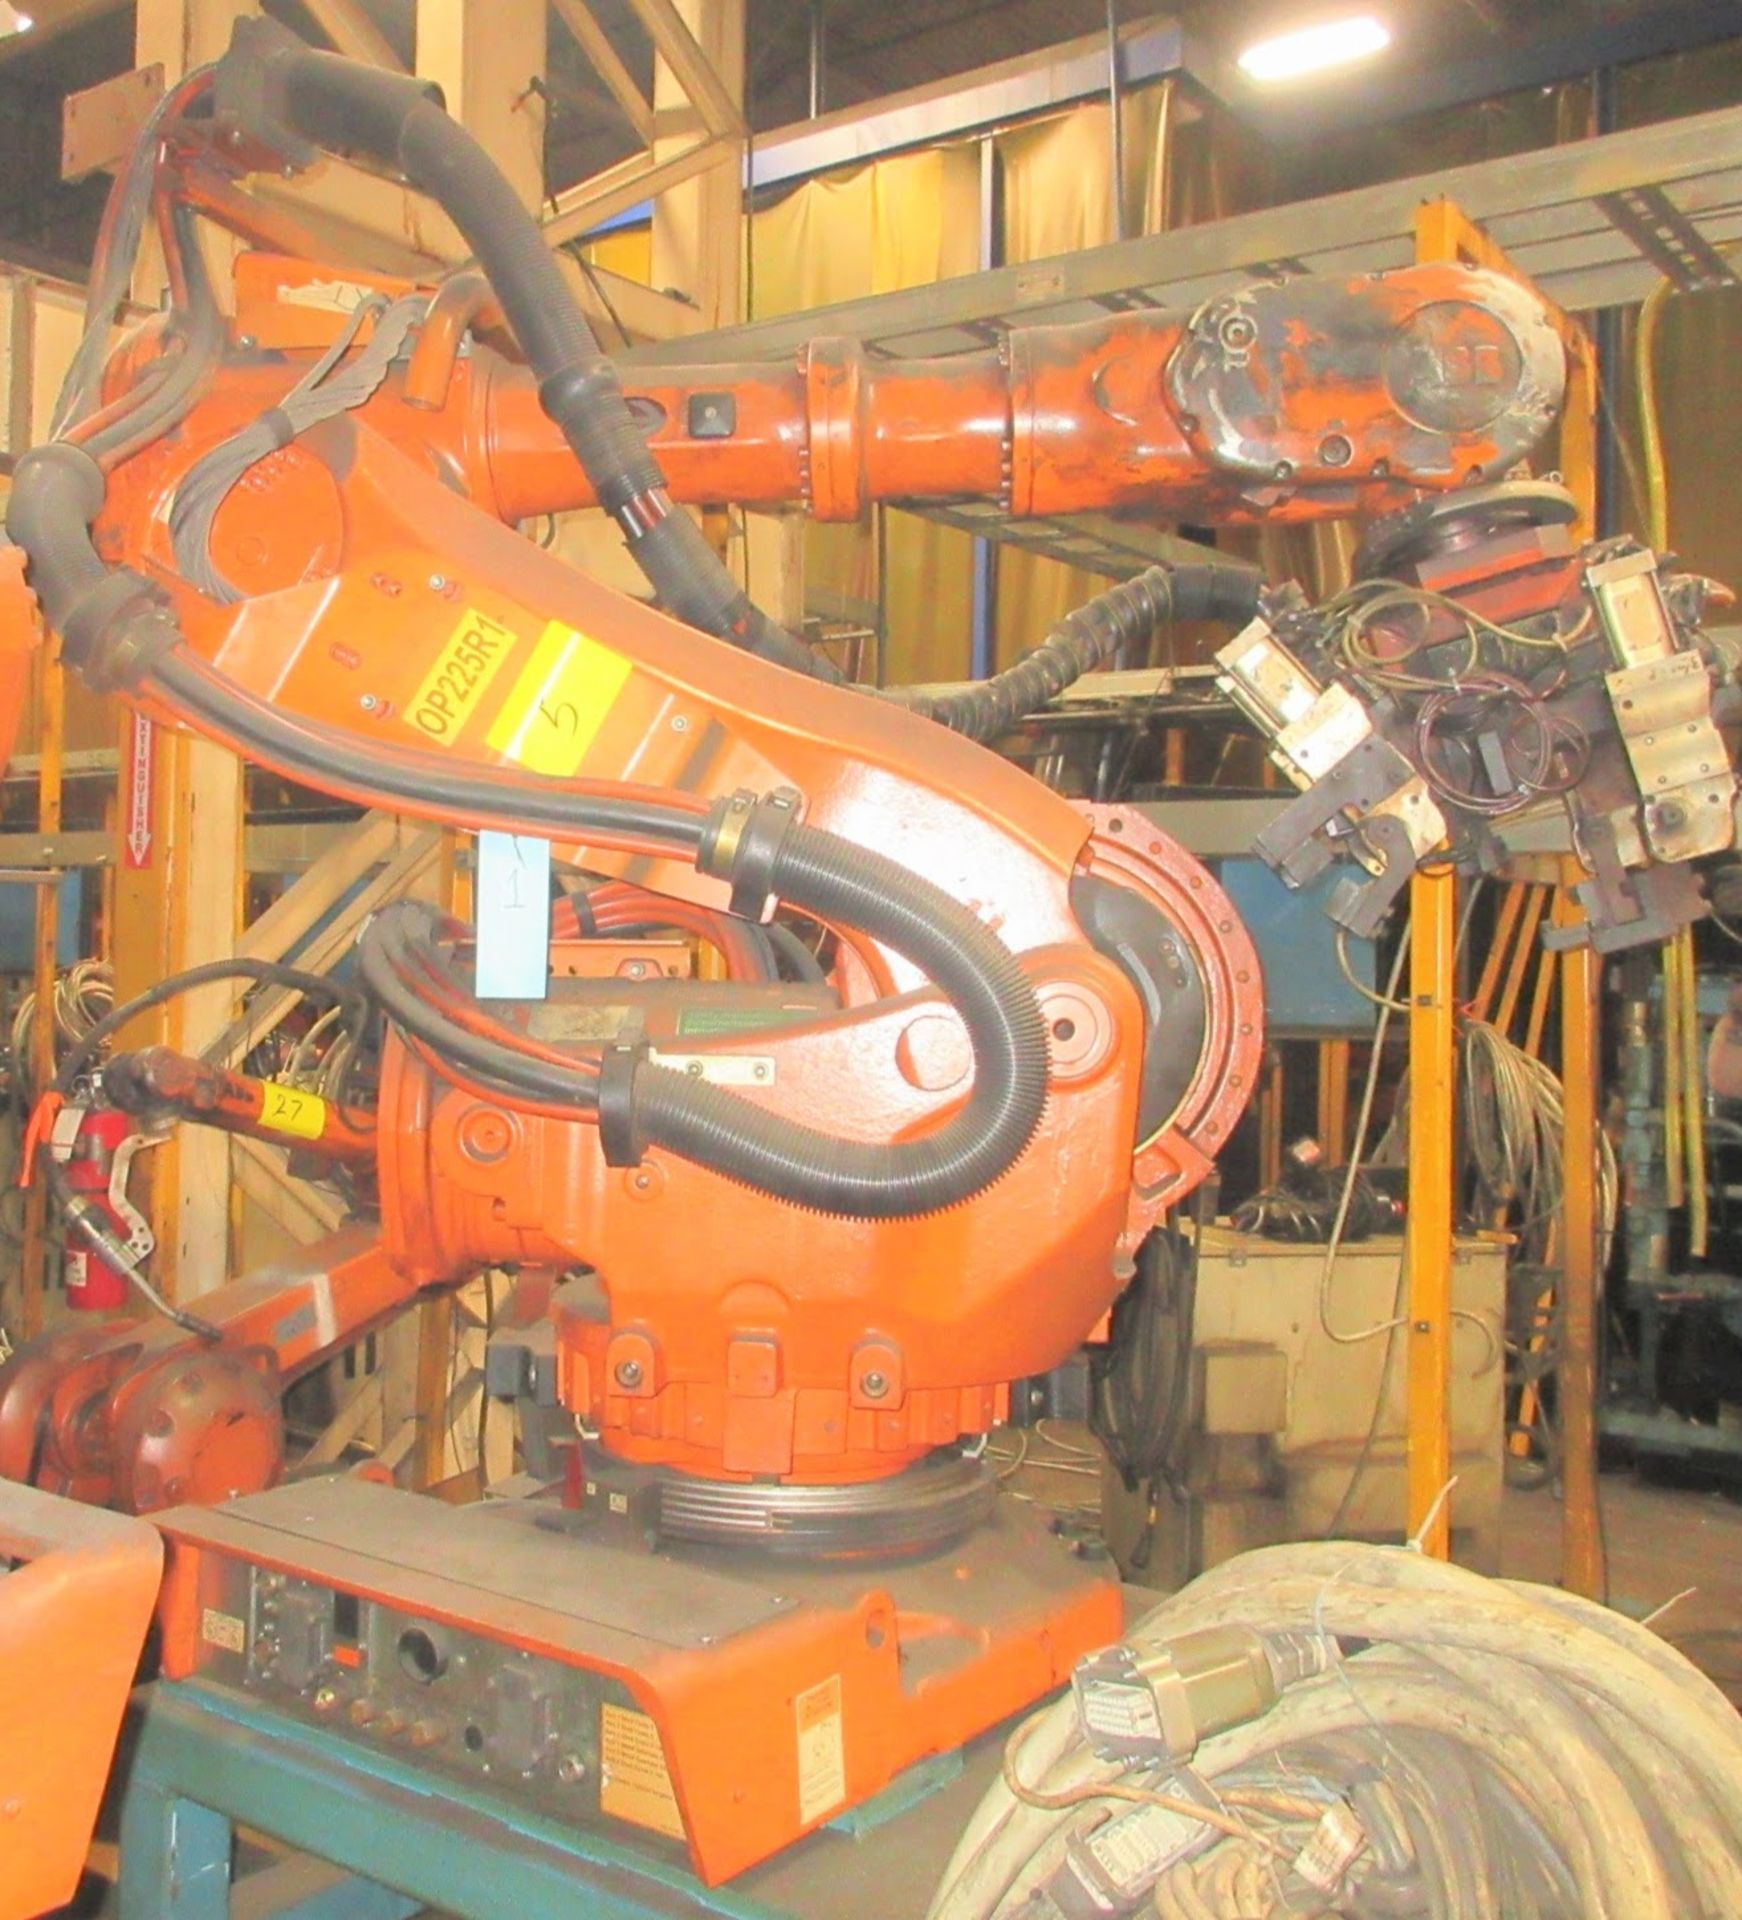 ABB IRB6600 LOADING ROBOT W/ ROBOT CONTROLLER, TEACH PENDANT & CABLES (LOCATED IN BRAMPTON, ON) (